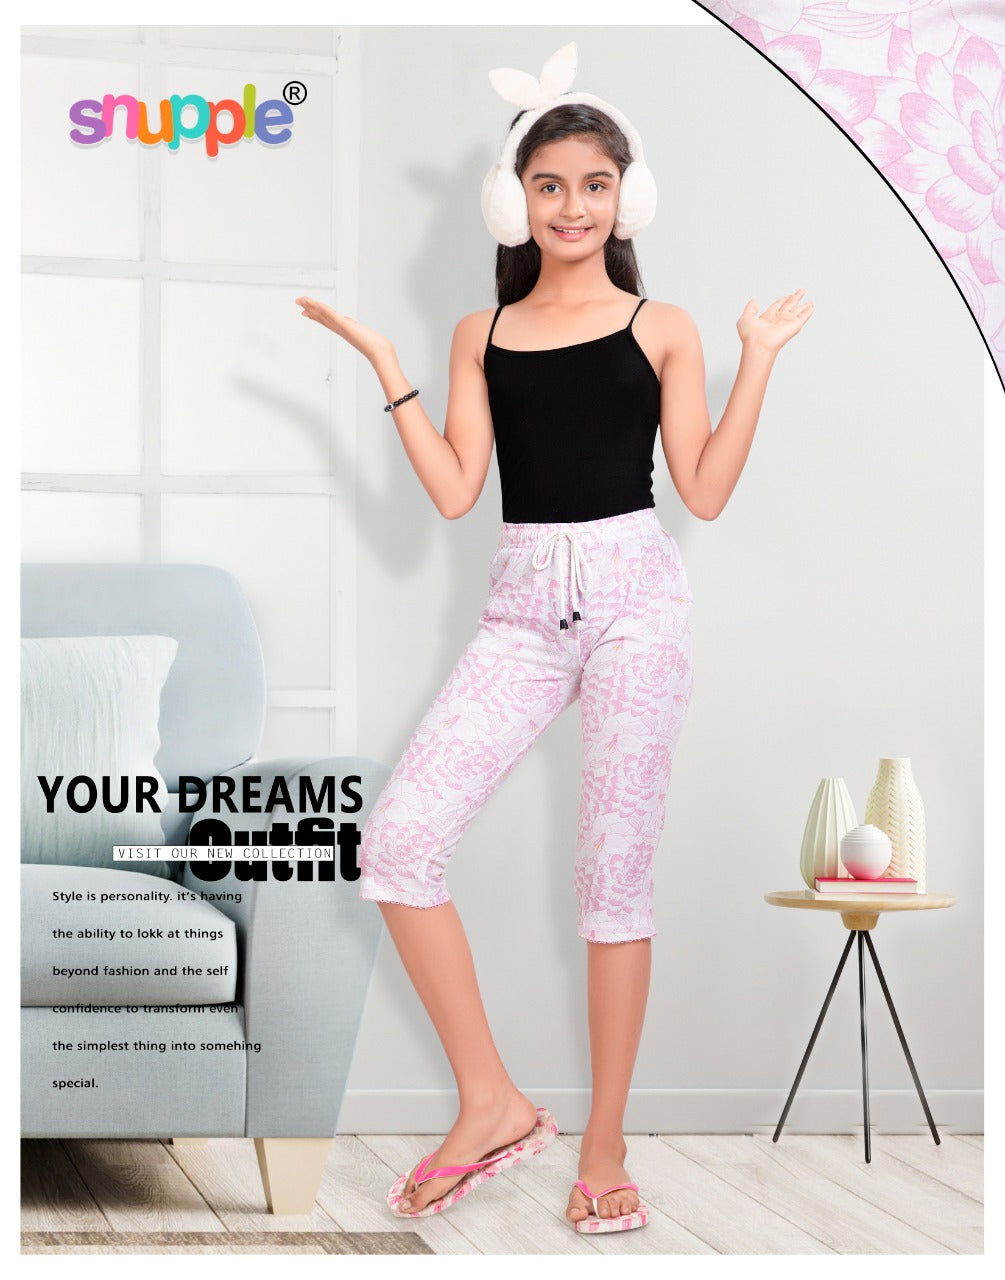 GIRLS CAPRI PANT ( PACK OF 15 PIECES 5 TO 10 YEARS )